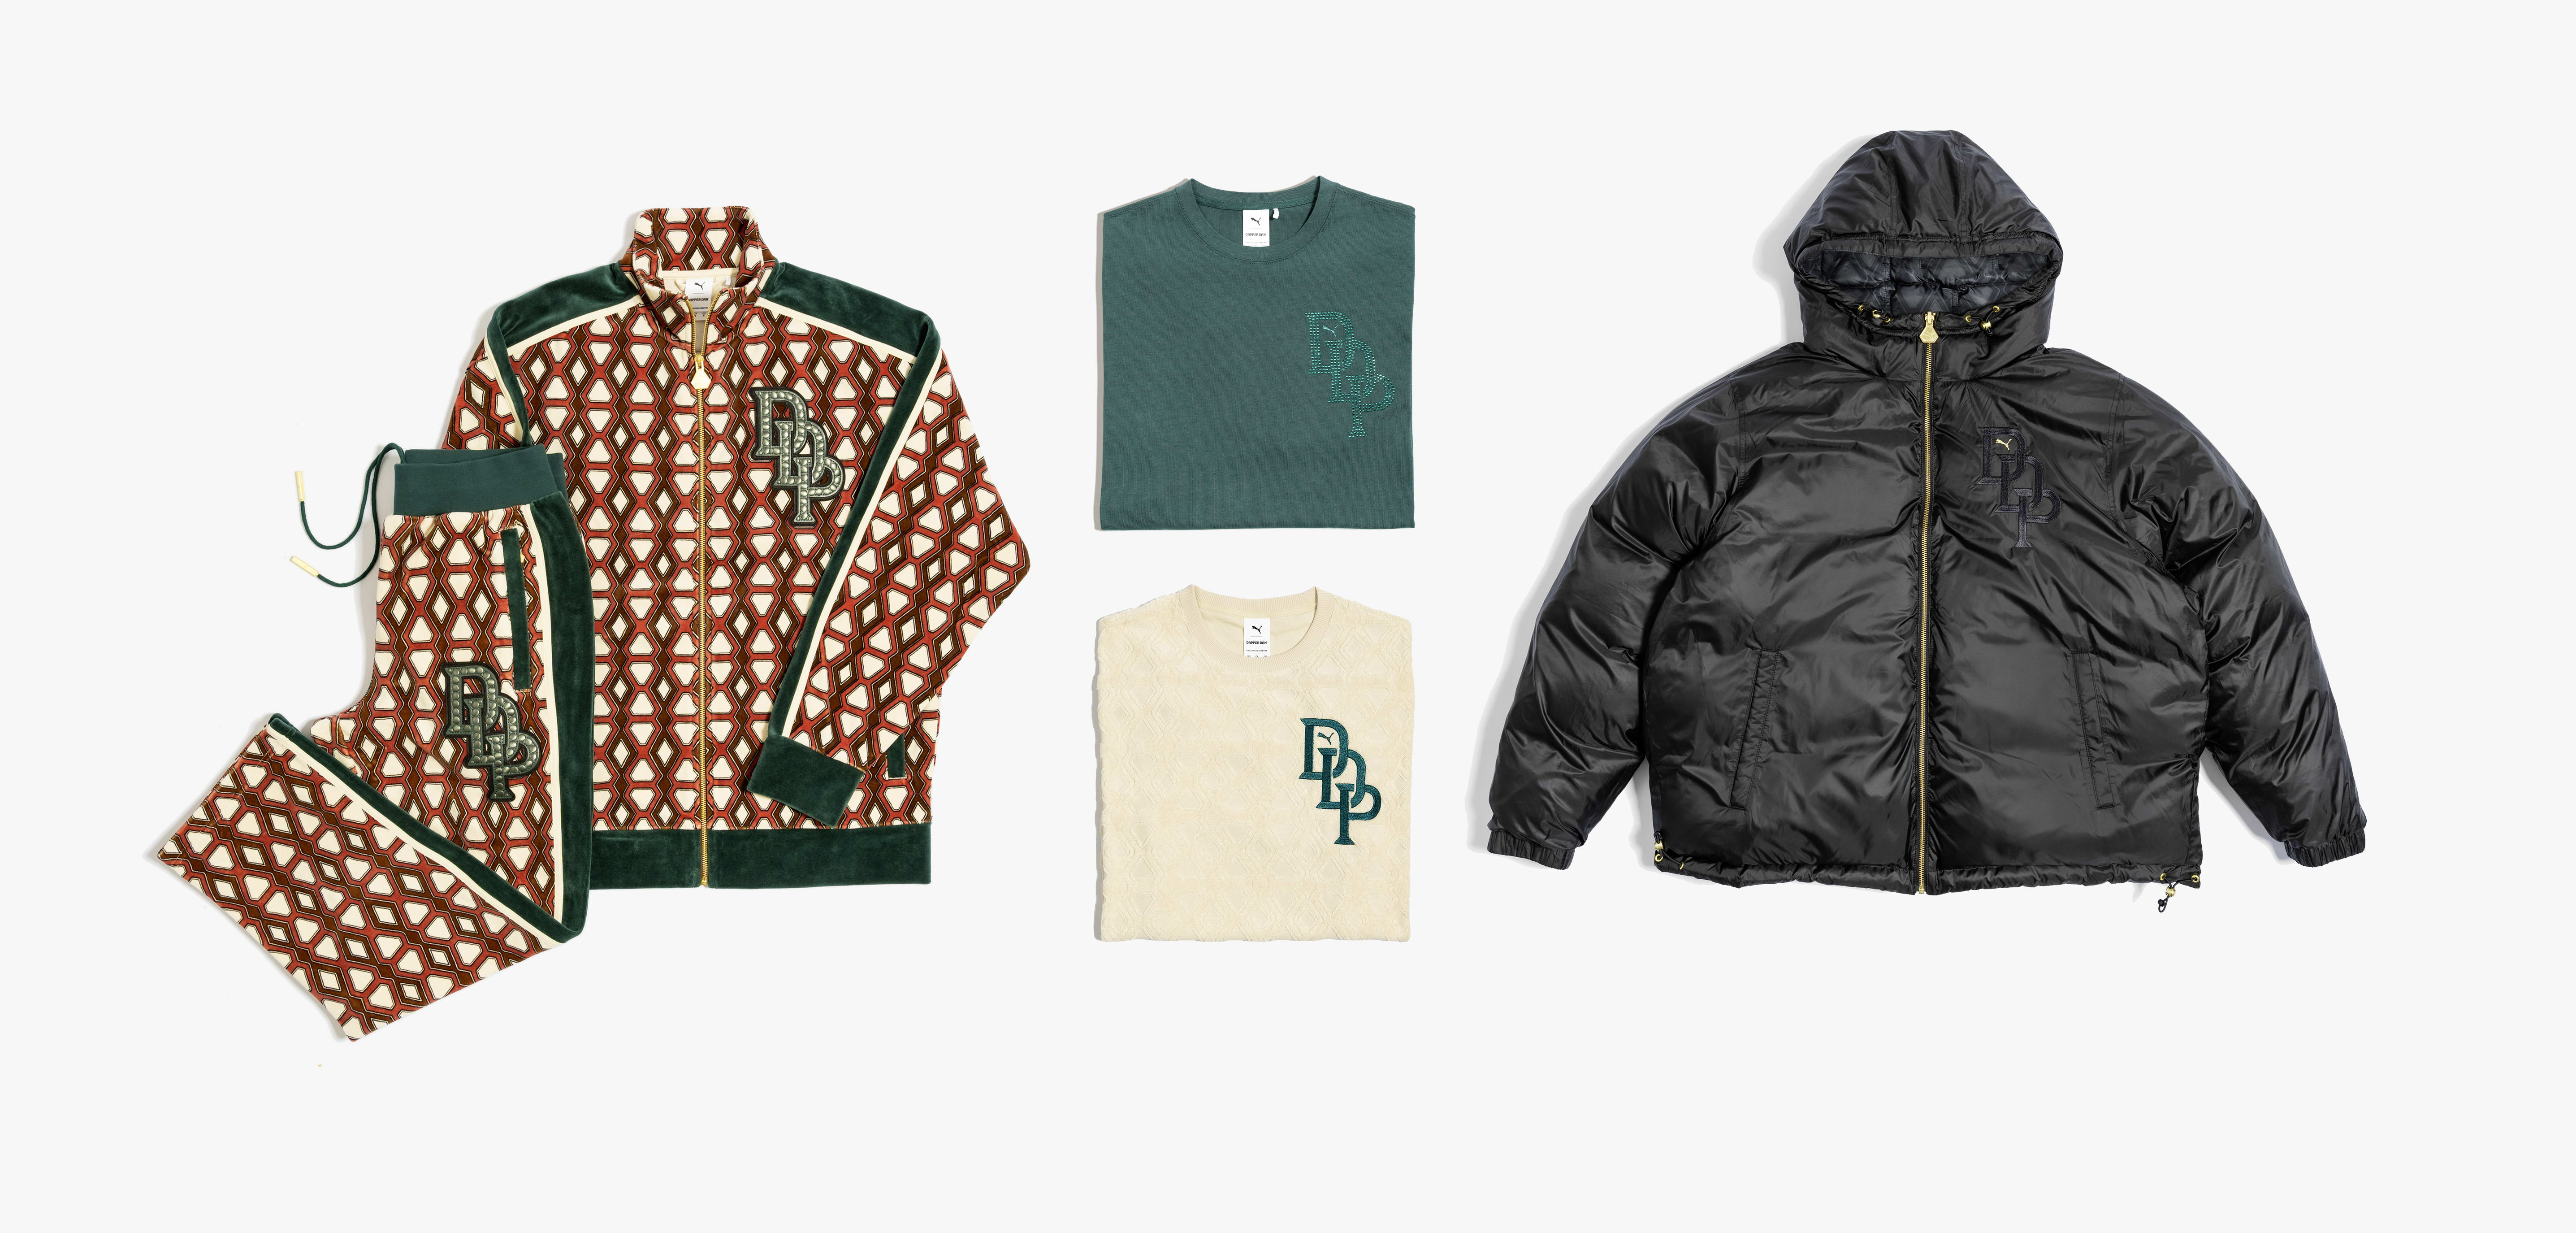 Puma and Dapper Dan Collab on a Stylish New Capsule Collection